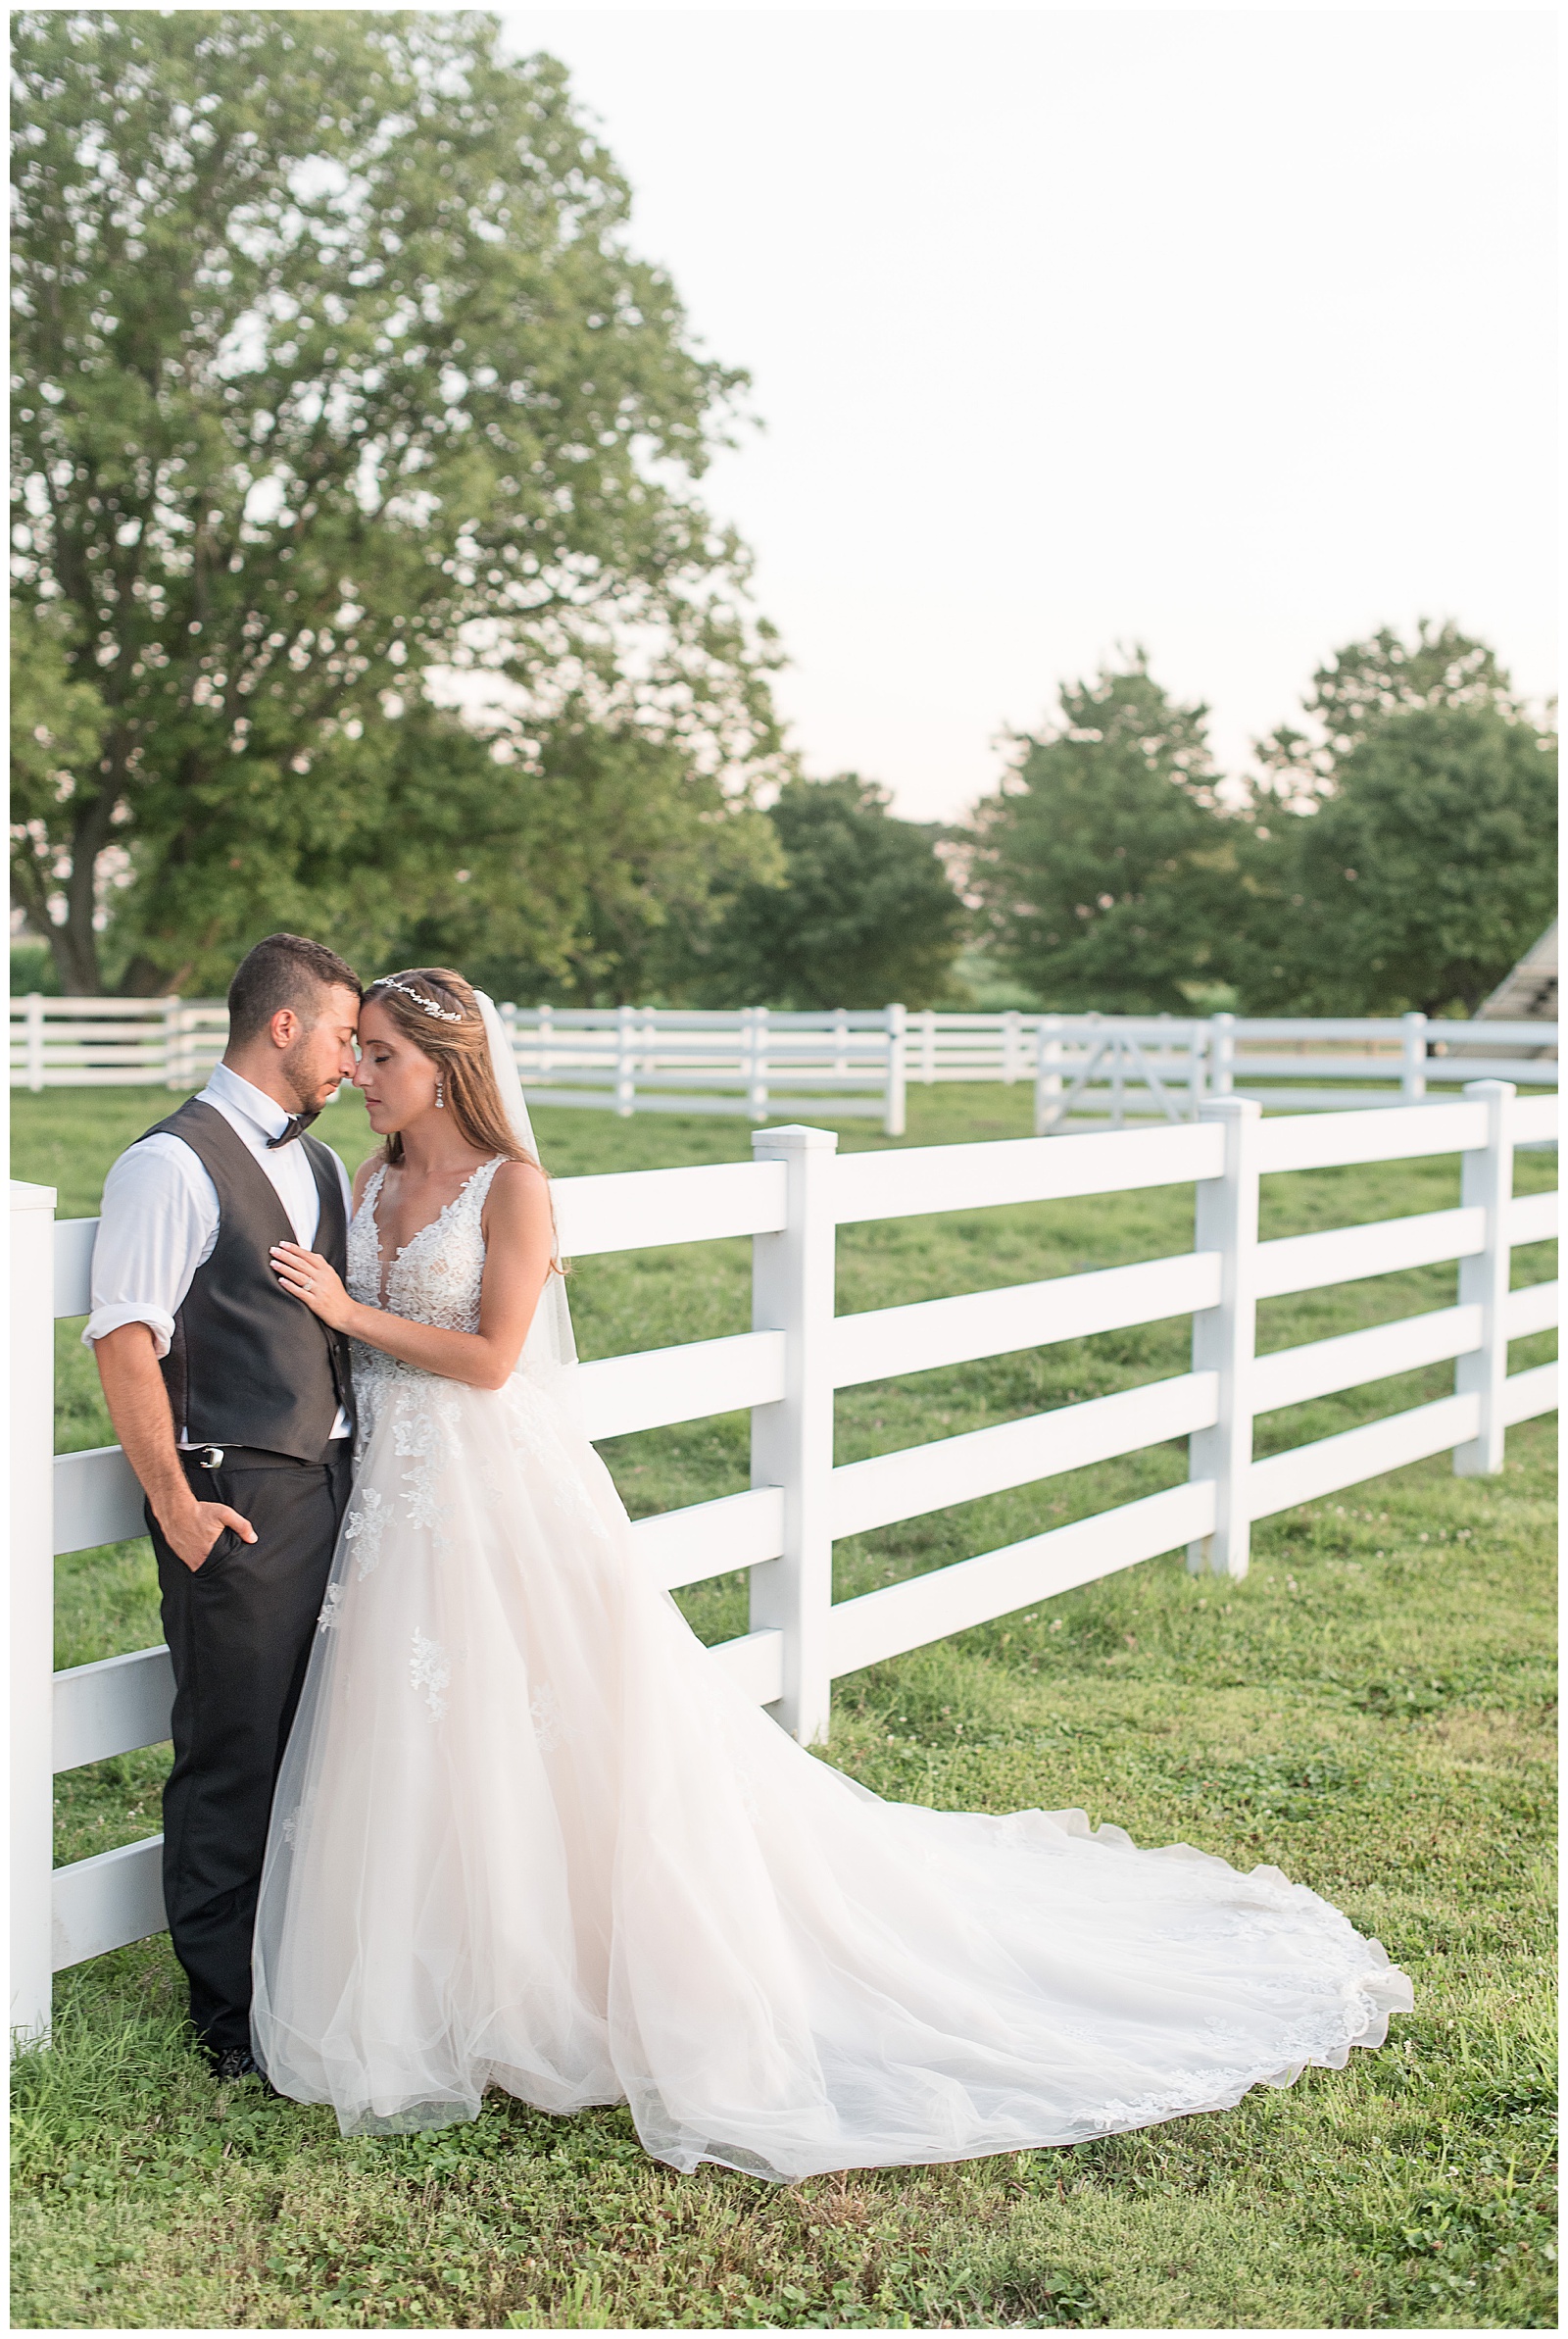 groom leaning against fence while bride leans against him and rests foreheads together